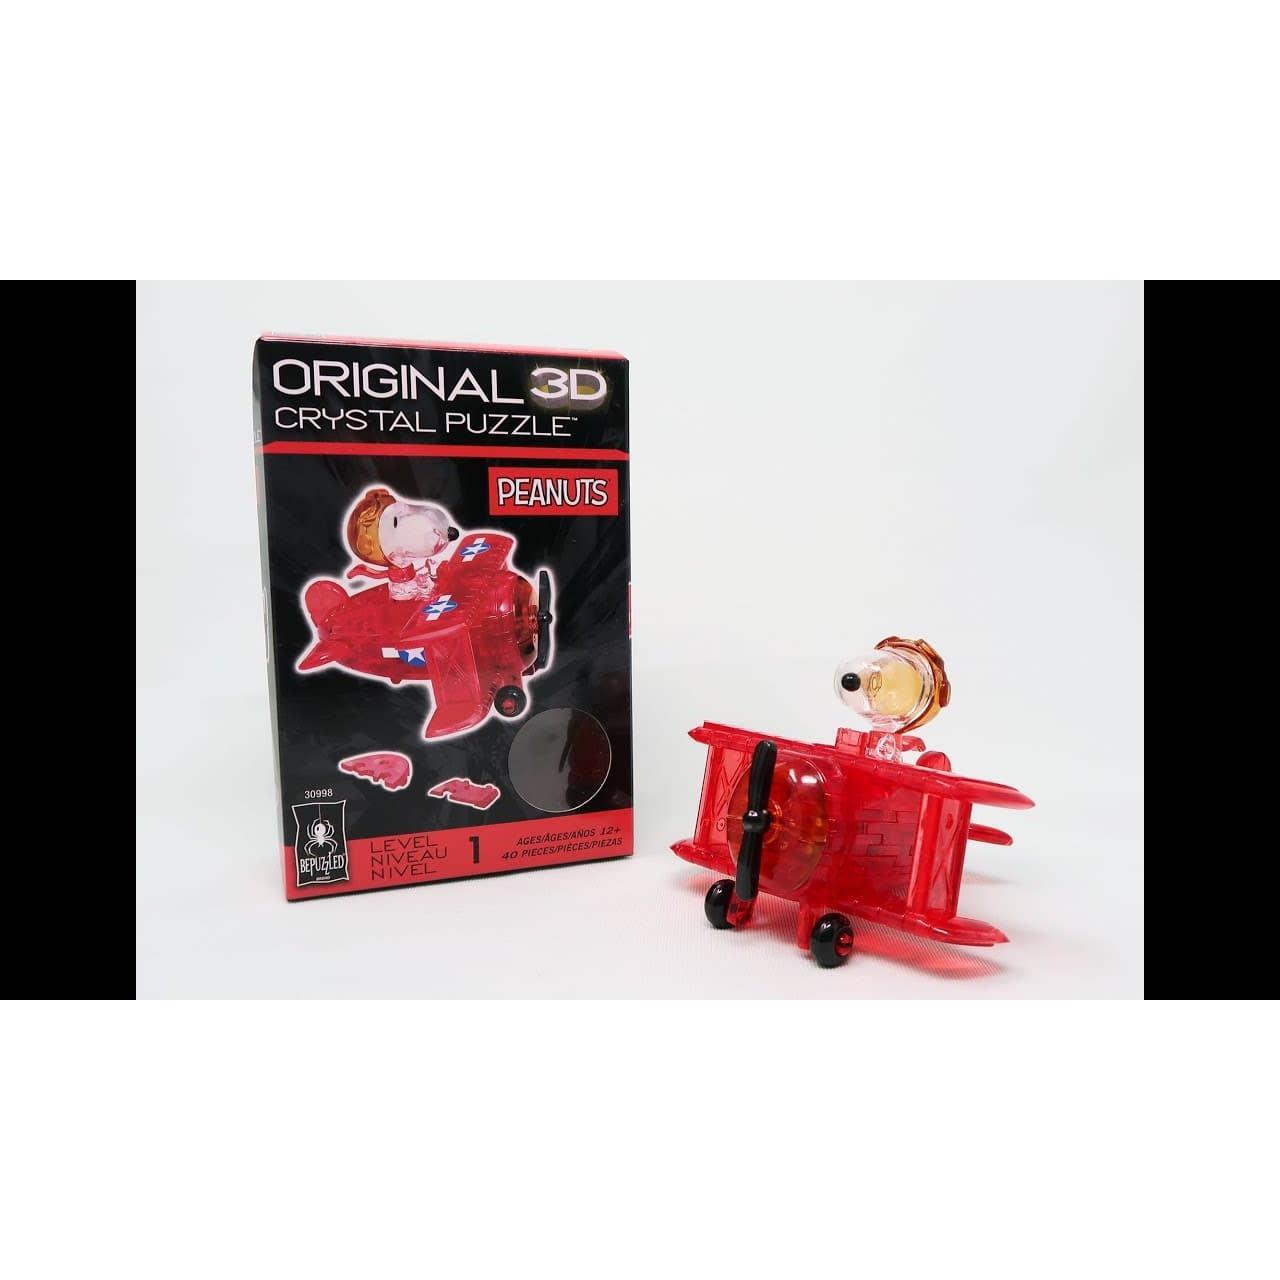 University Games-3D Licensed Crystal Puzzle - Snoopy Flying Ace-30998-Legacy Toys